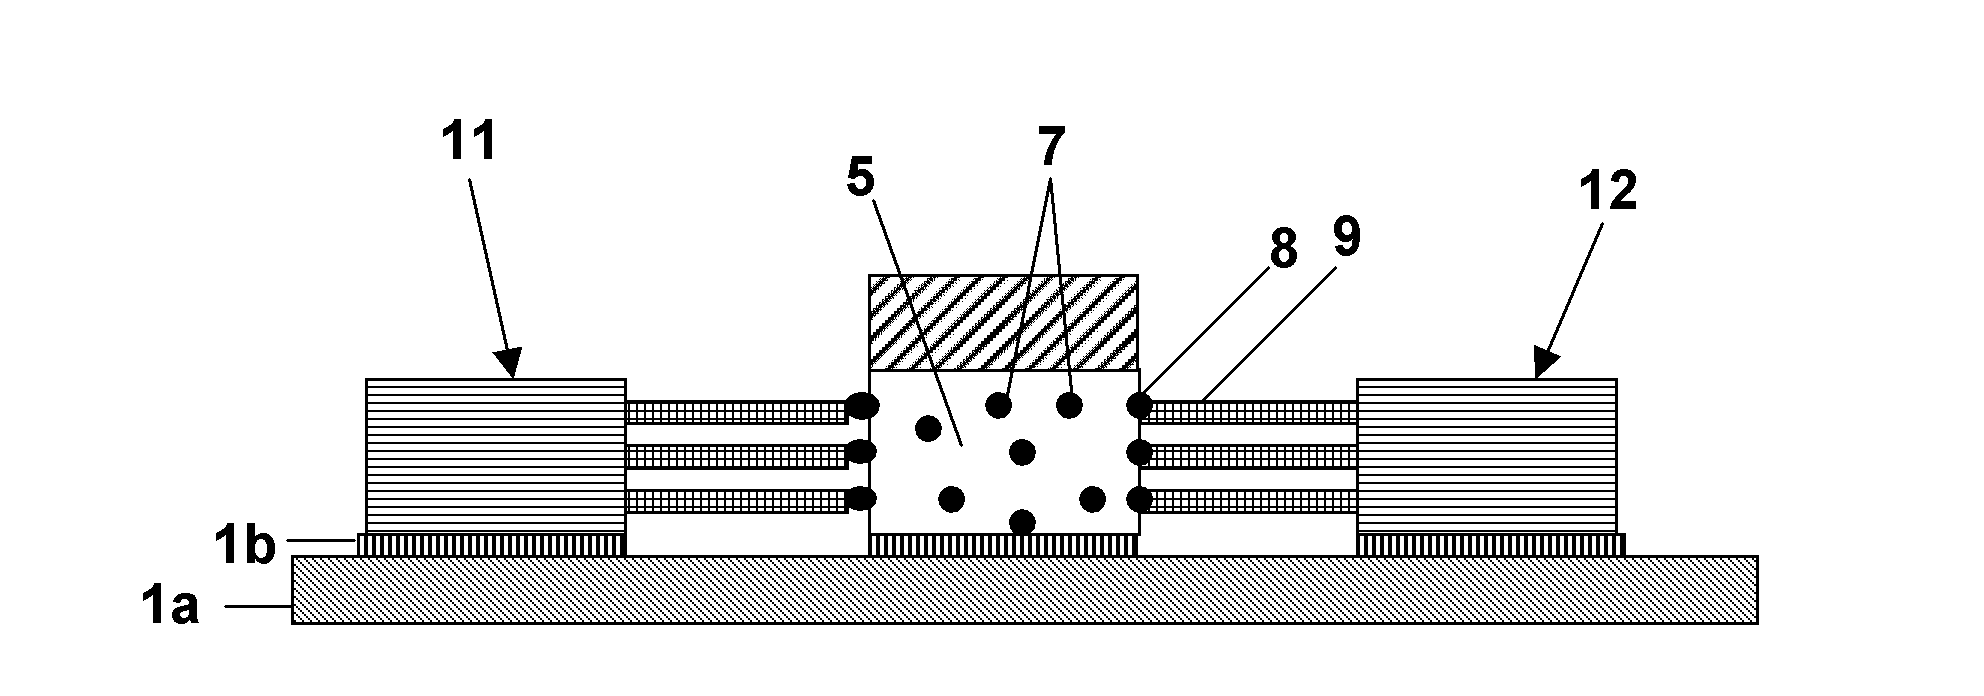 Method for forming catalyst nanoparticles for growing elongated nanostructures